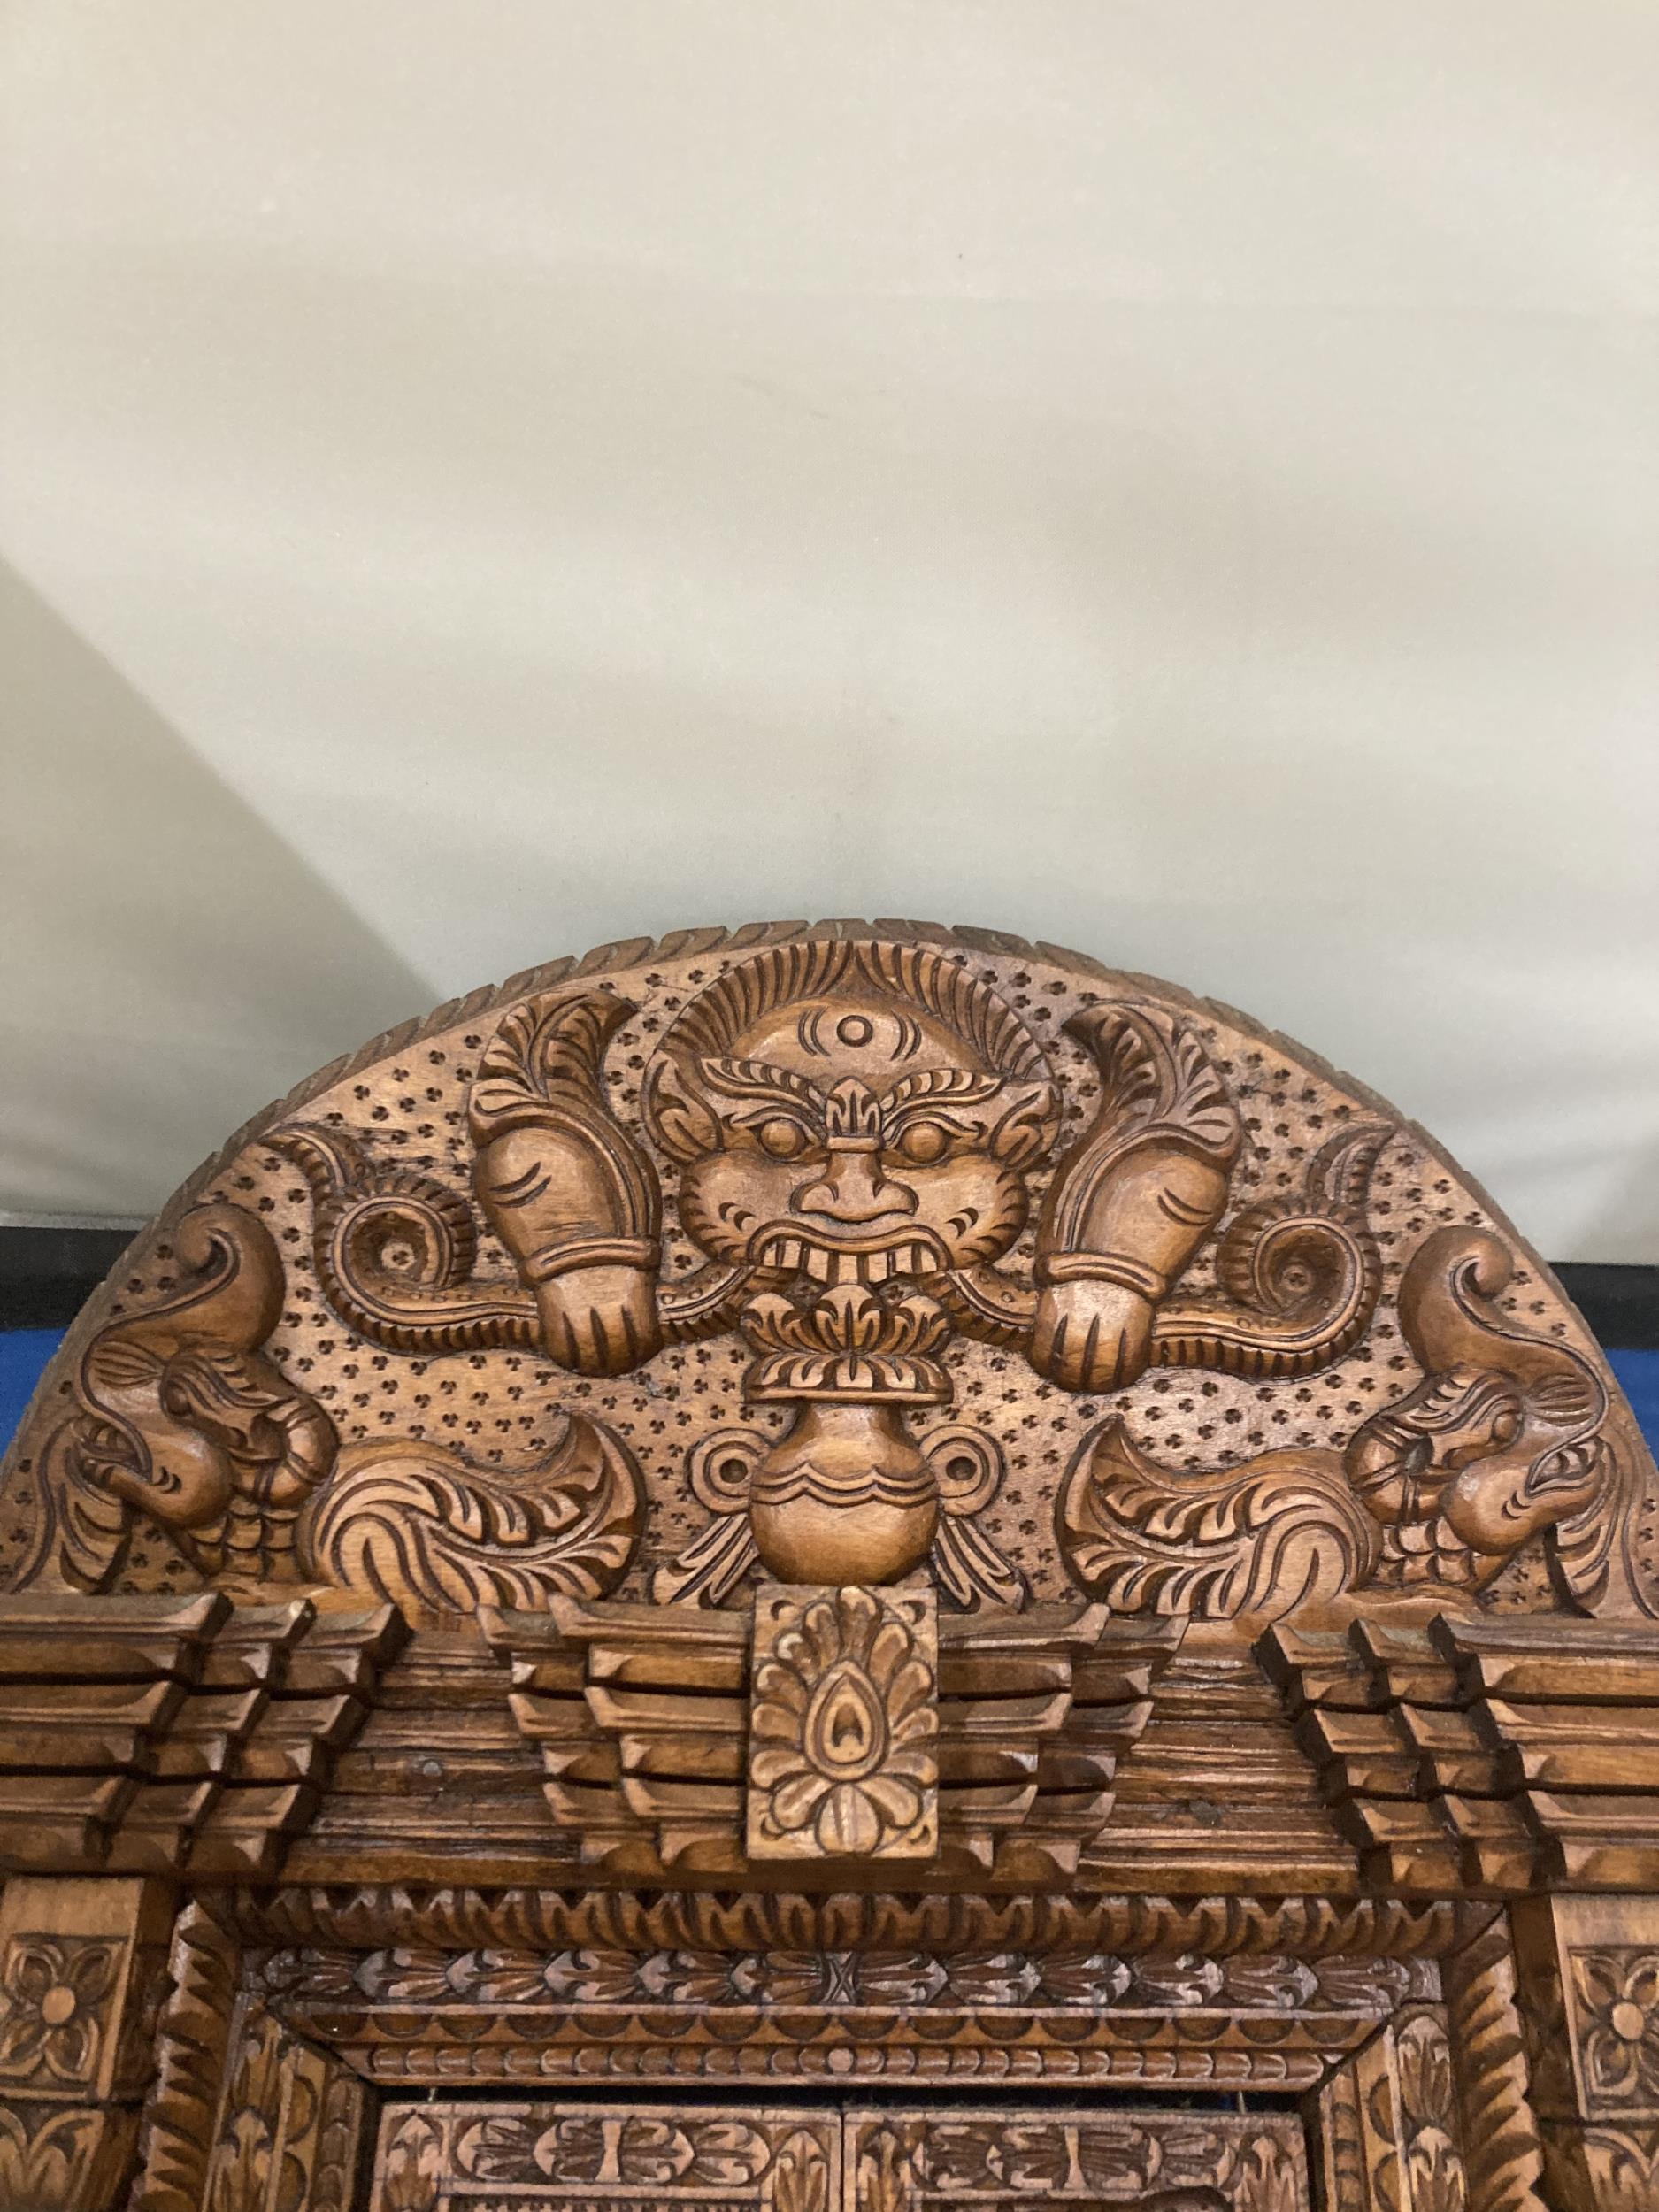 A HEAVILY CARVED ASTAMANGAL DOOR FRAME WALL HANGING - Image 2 of 5